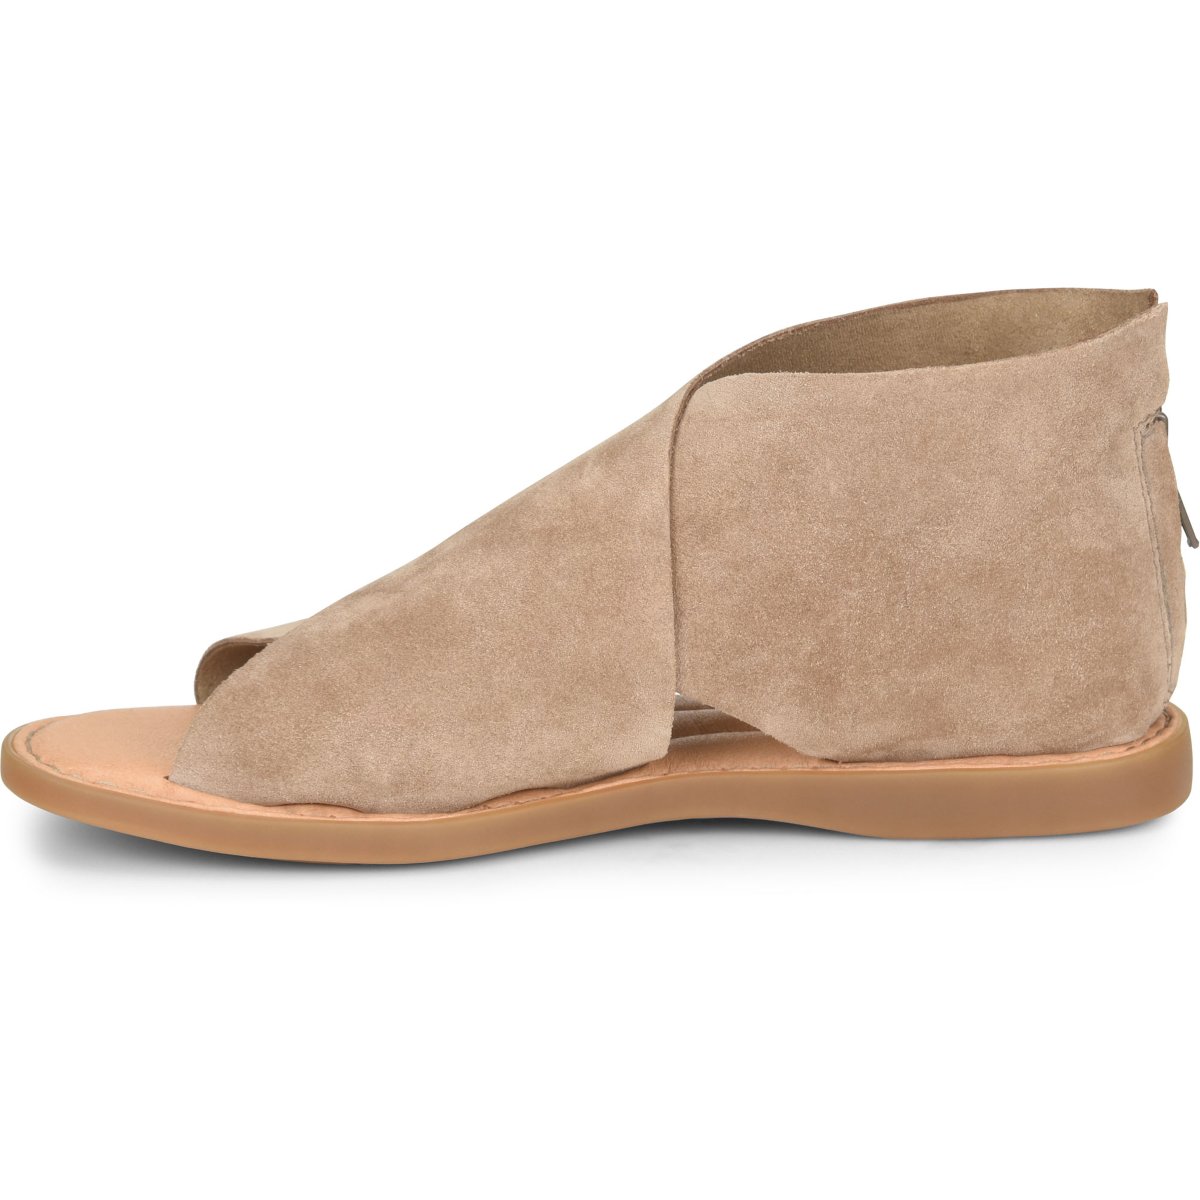 BORN Women's Iwa Sandal Taupe Suede (Beige) - F78017 TAUPE - TAUPE, 9